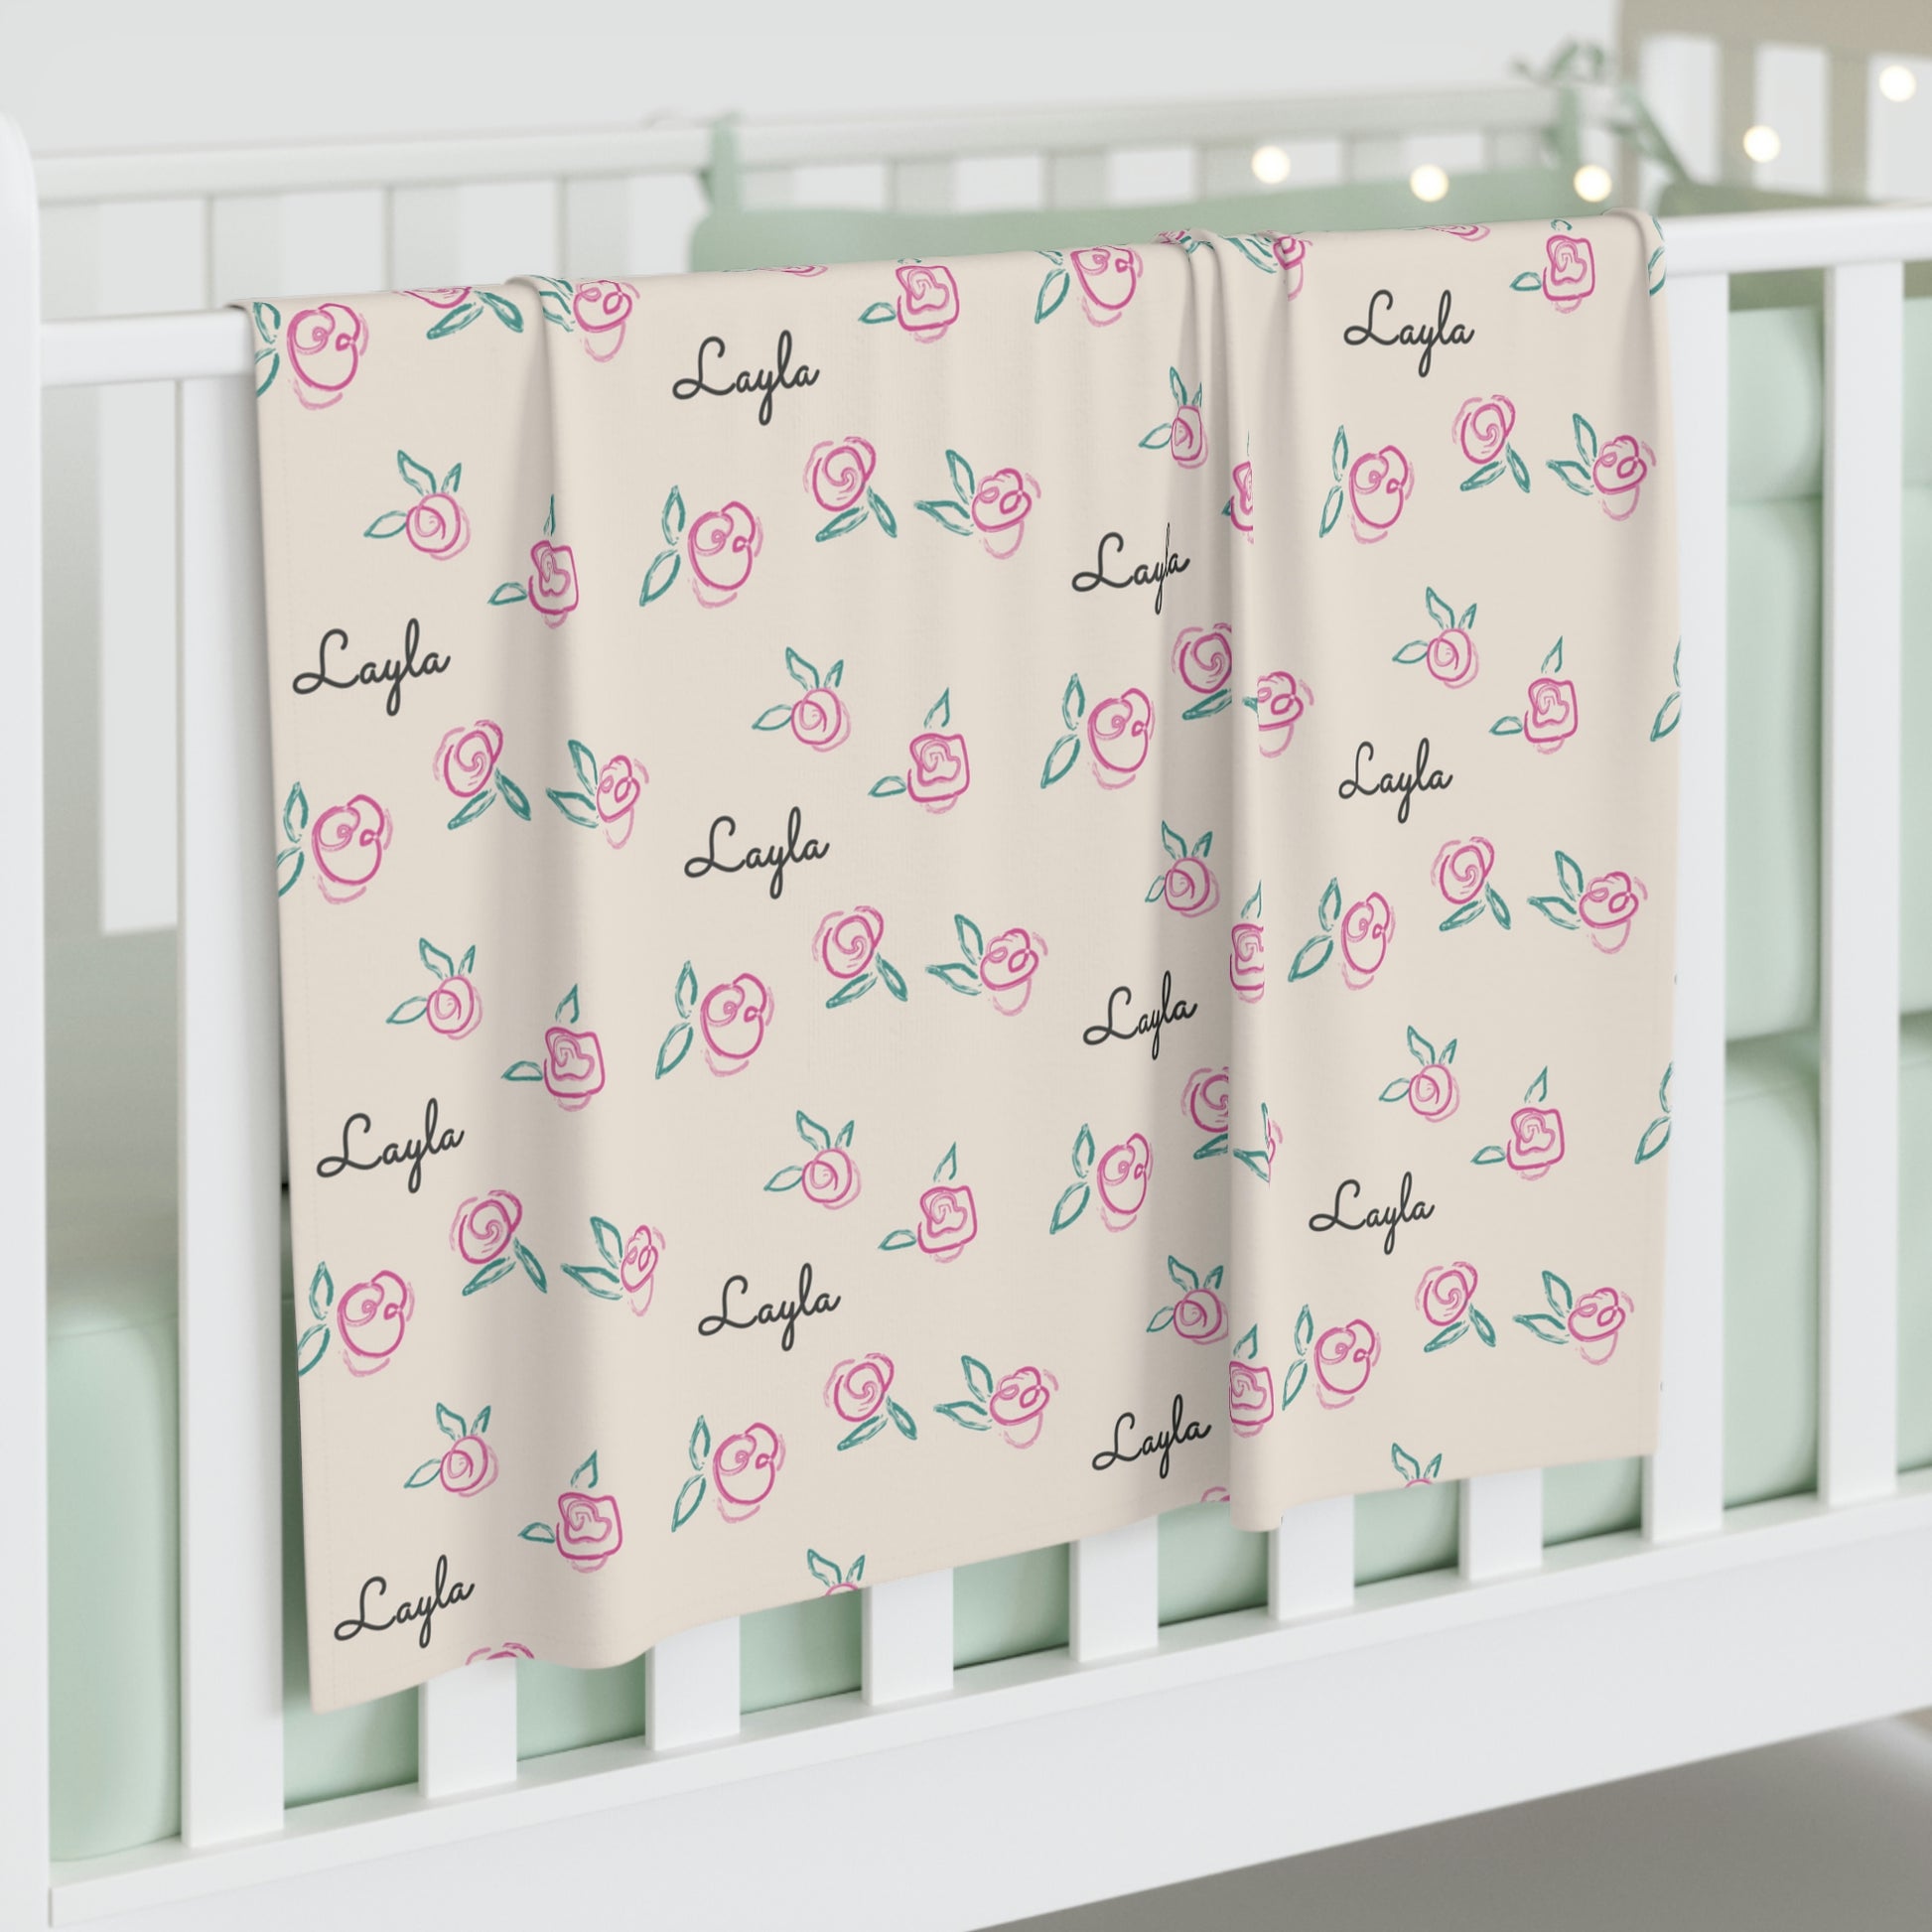 Jersey personalized baby blanket in pink rose with green leaves pattern hung over side of white crib